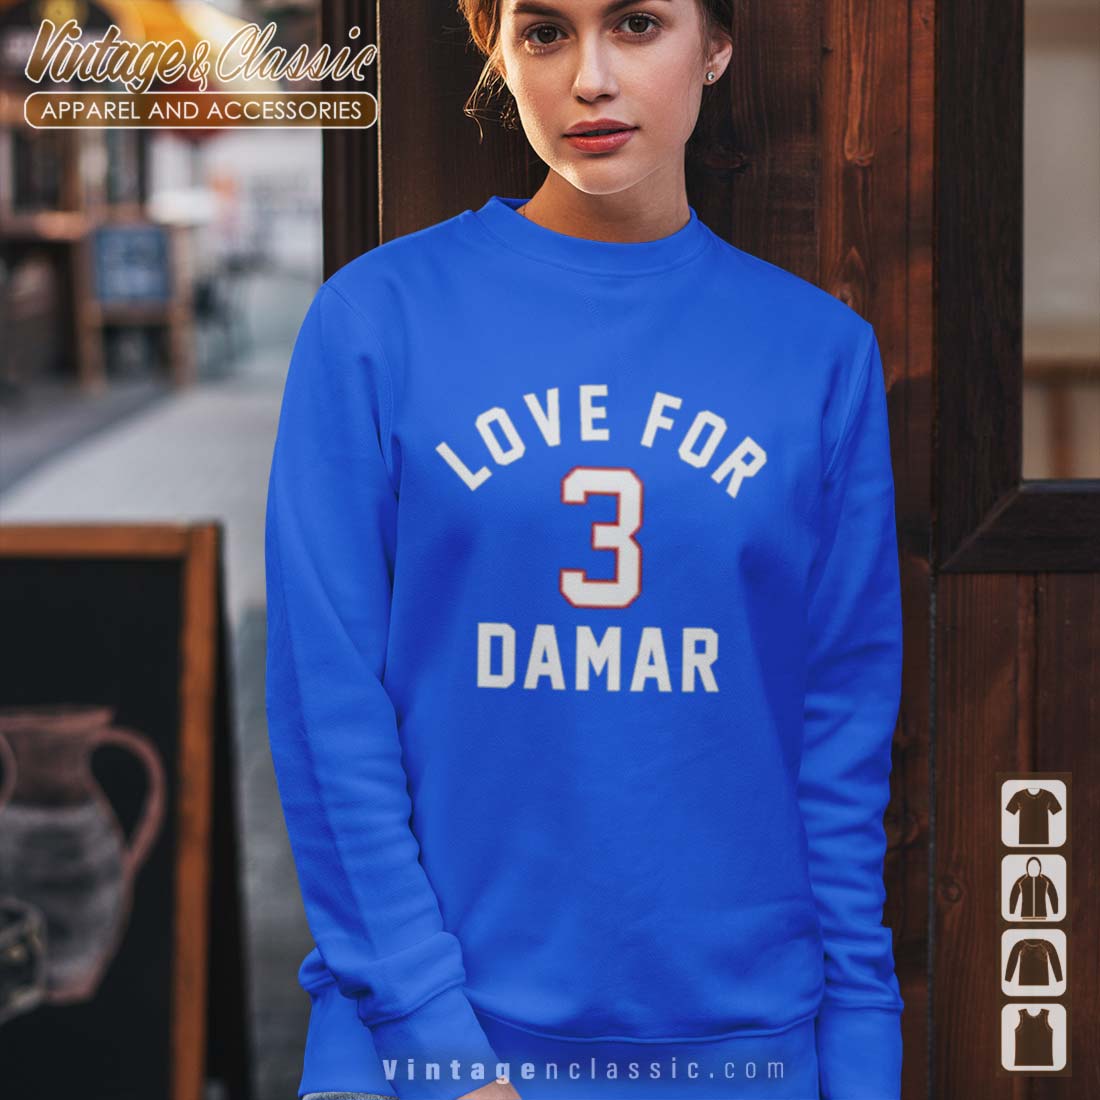 All NFL Teams to Wear 'Love for Damar 3' Shirts in Support of